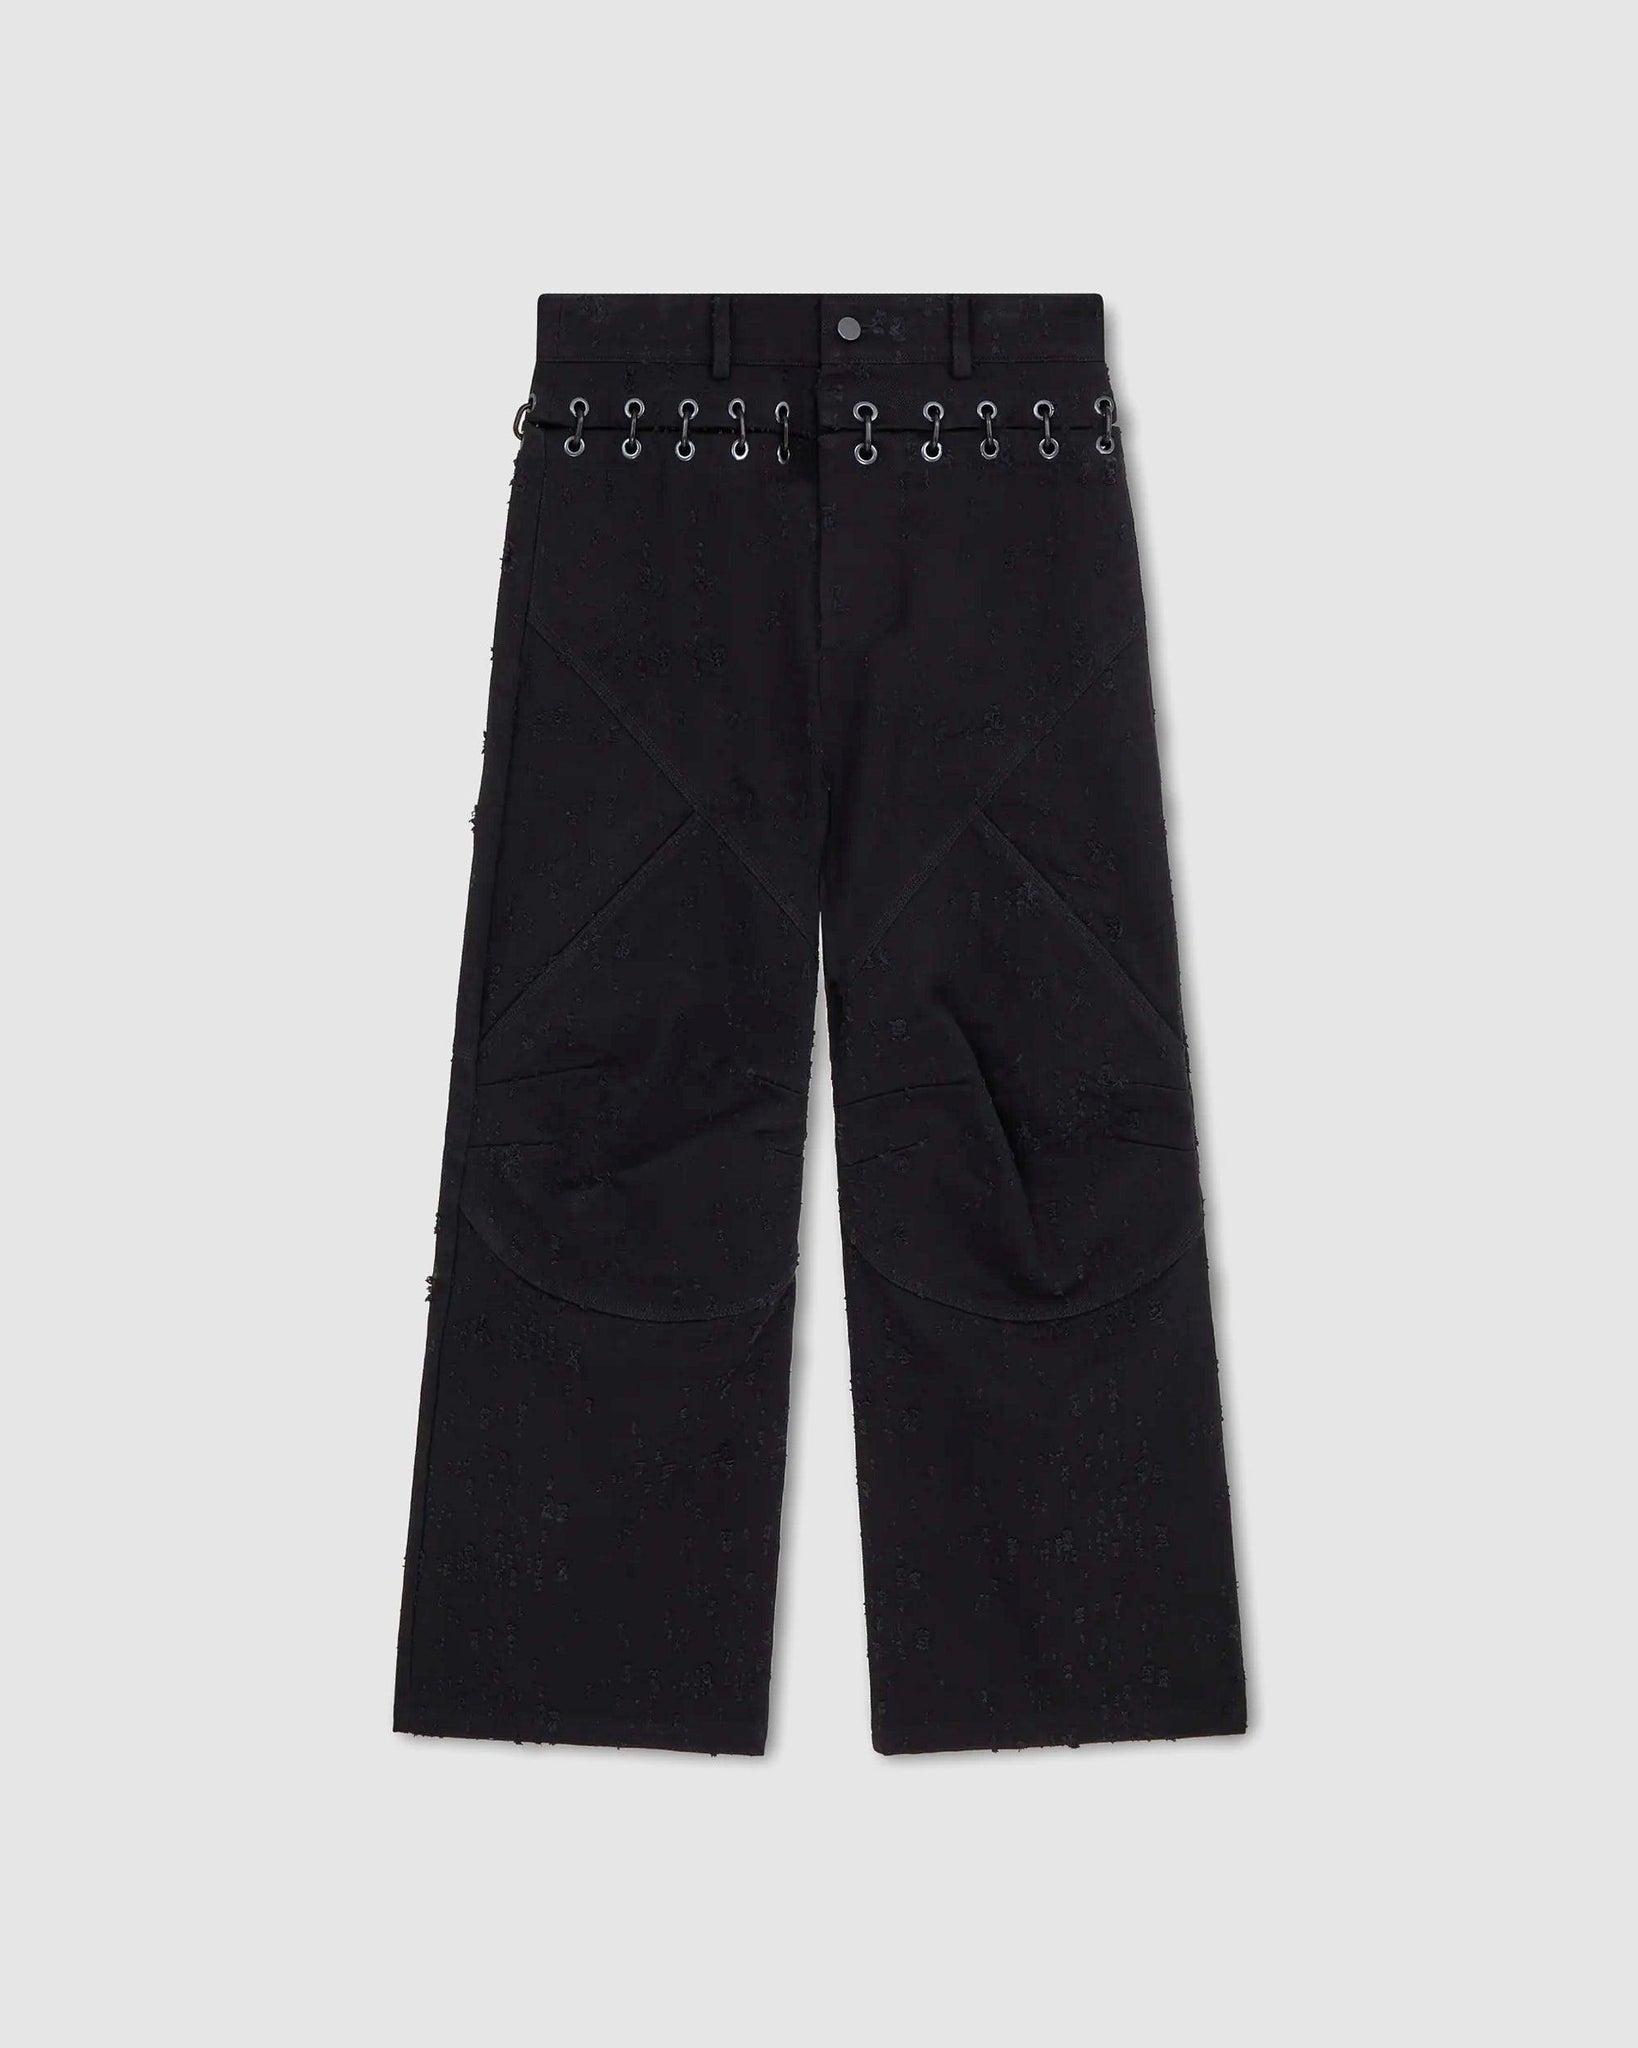 Chainlock Biker Pants - {{ collection.title }} - Chinatown Country Club 